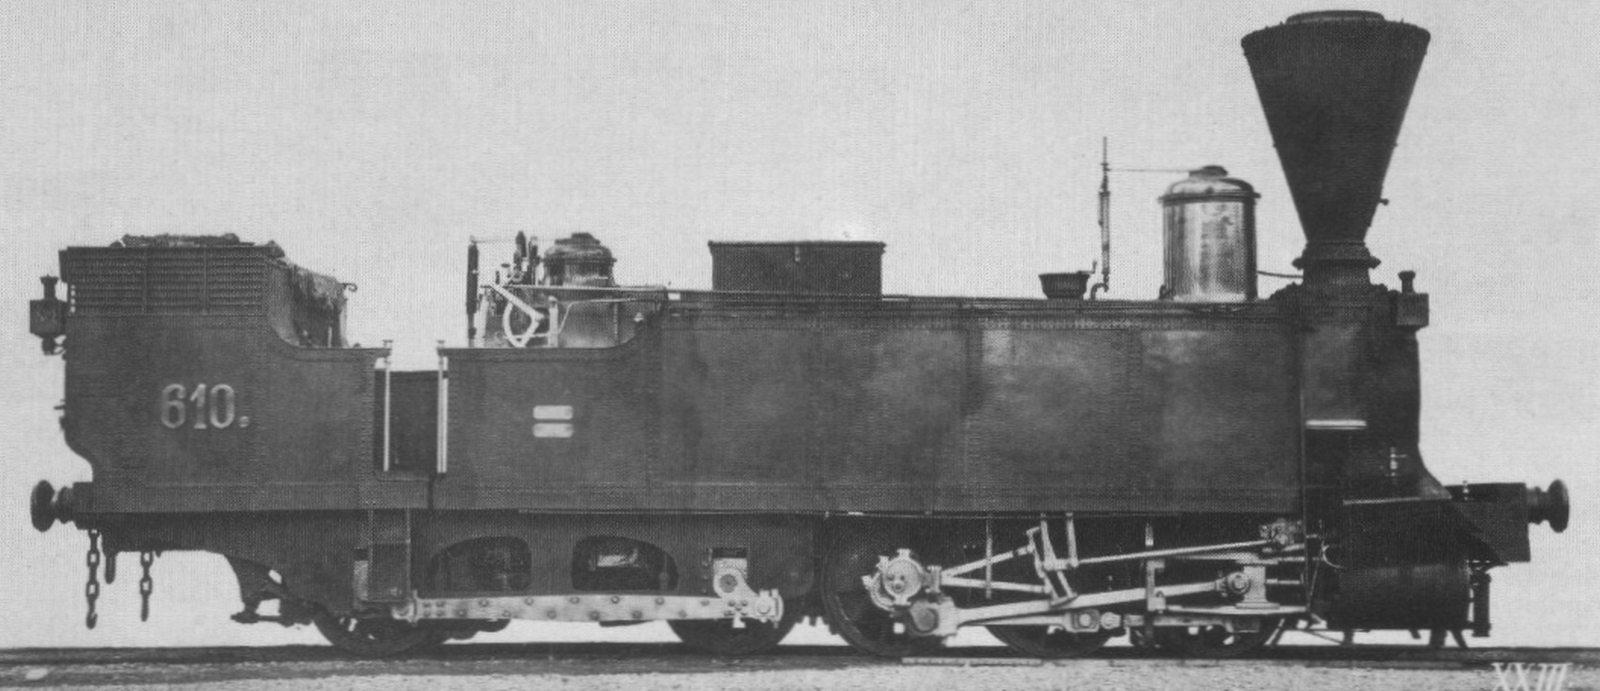 No. 610 of the Südbahngesellschaft with coupling rods on the tender